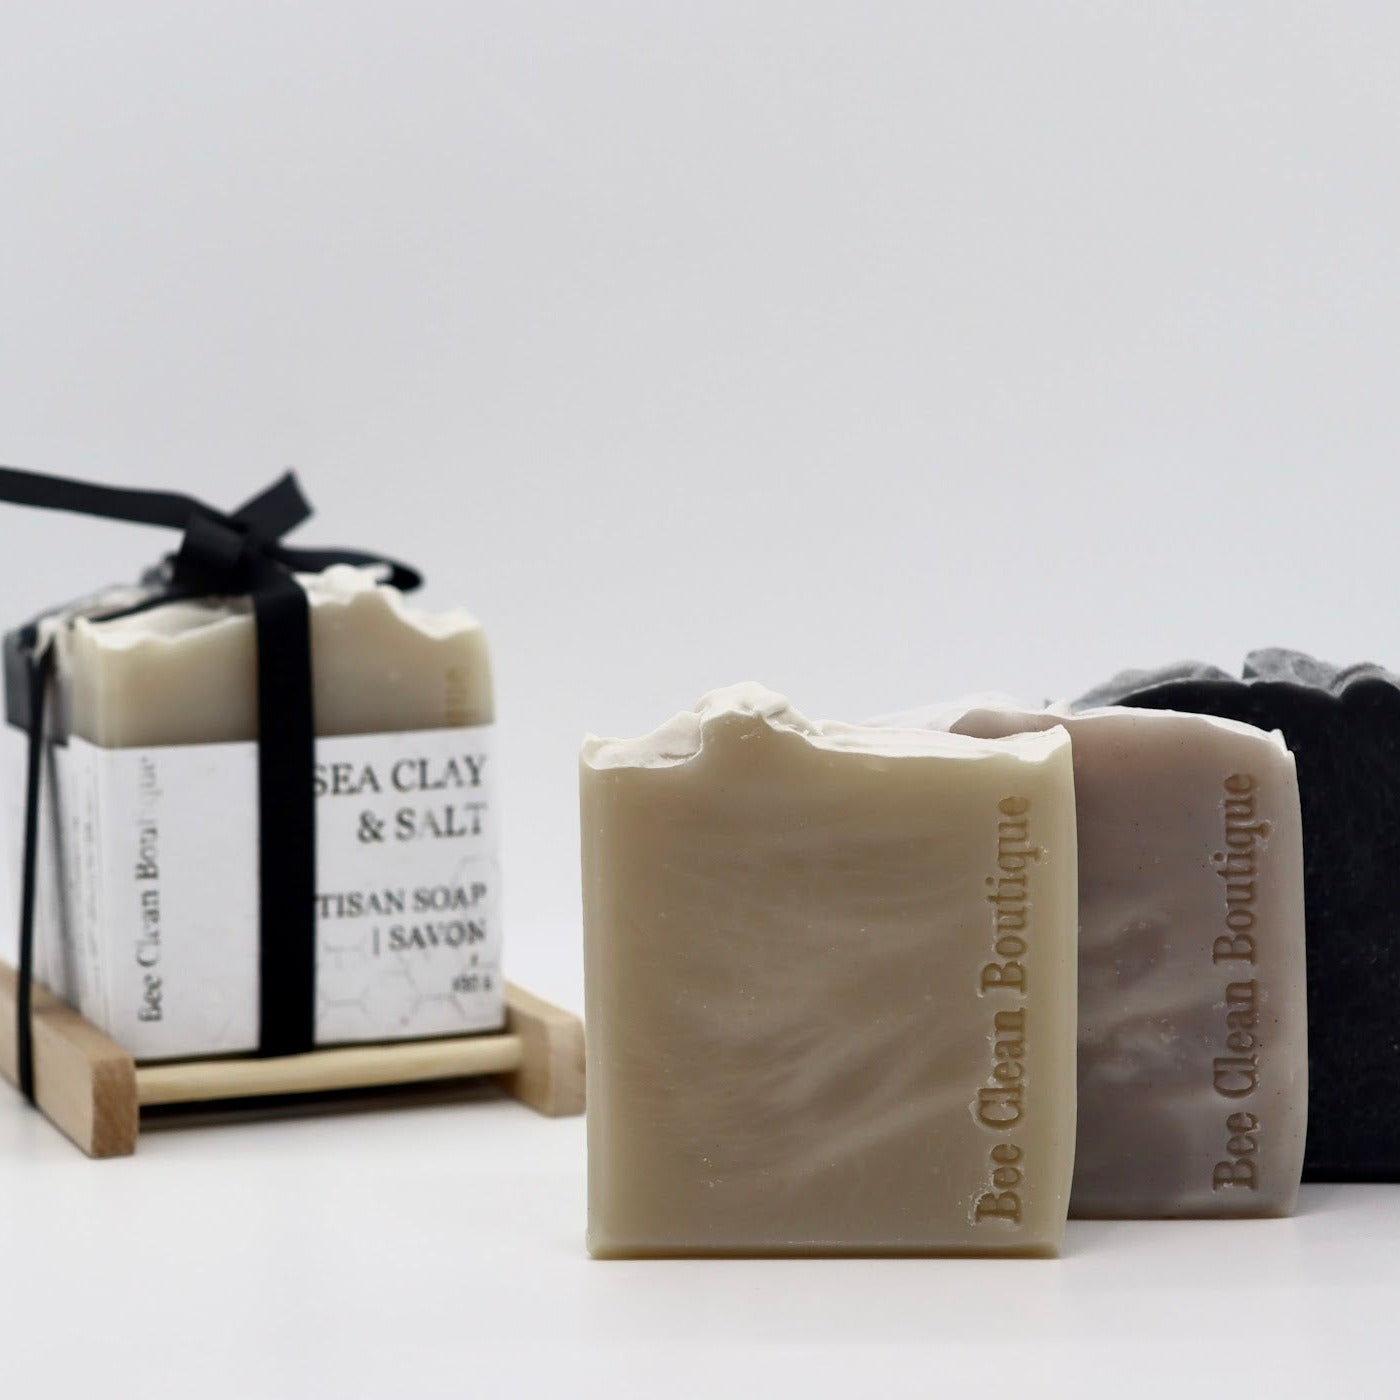 3 bars of loose bar soaps displayed in front of a set of soaps tied together with black ribbon on a wooden soap dish